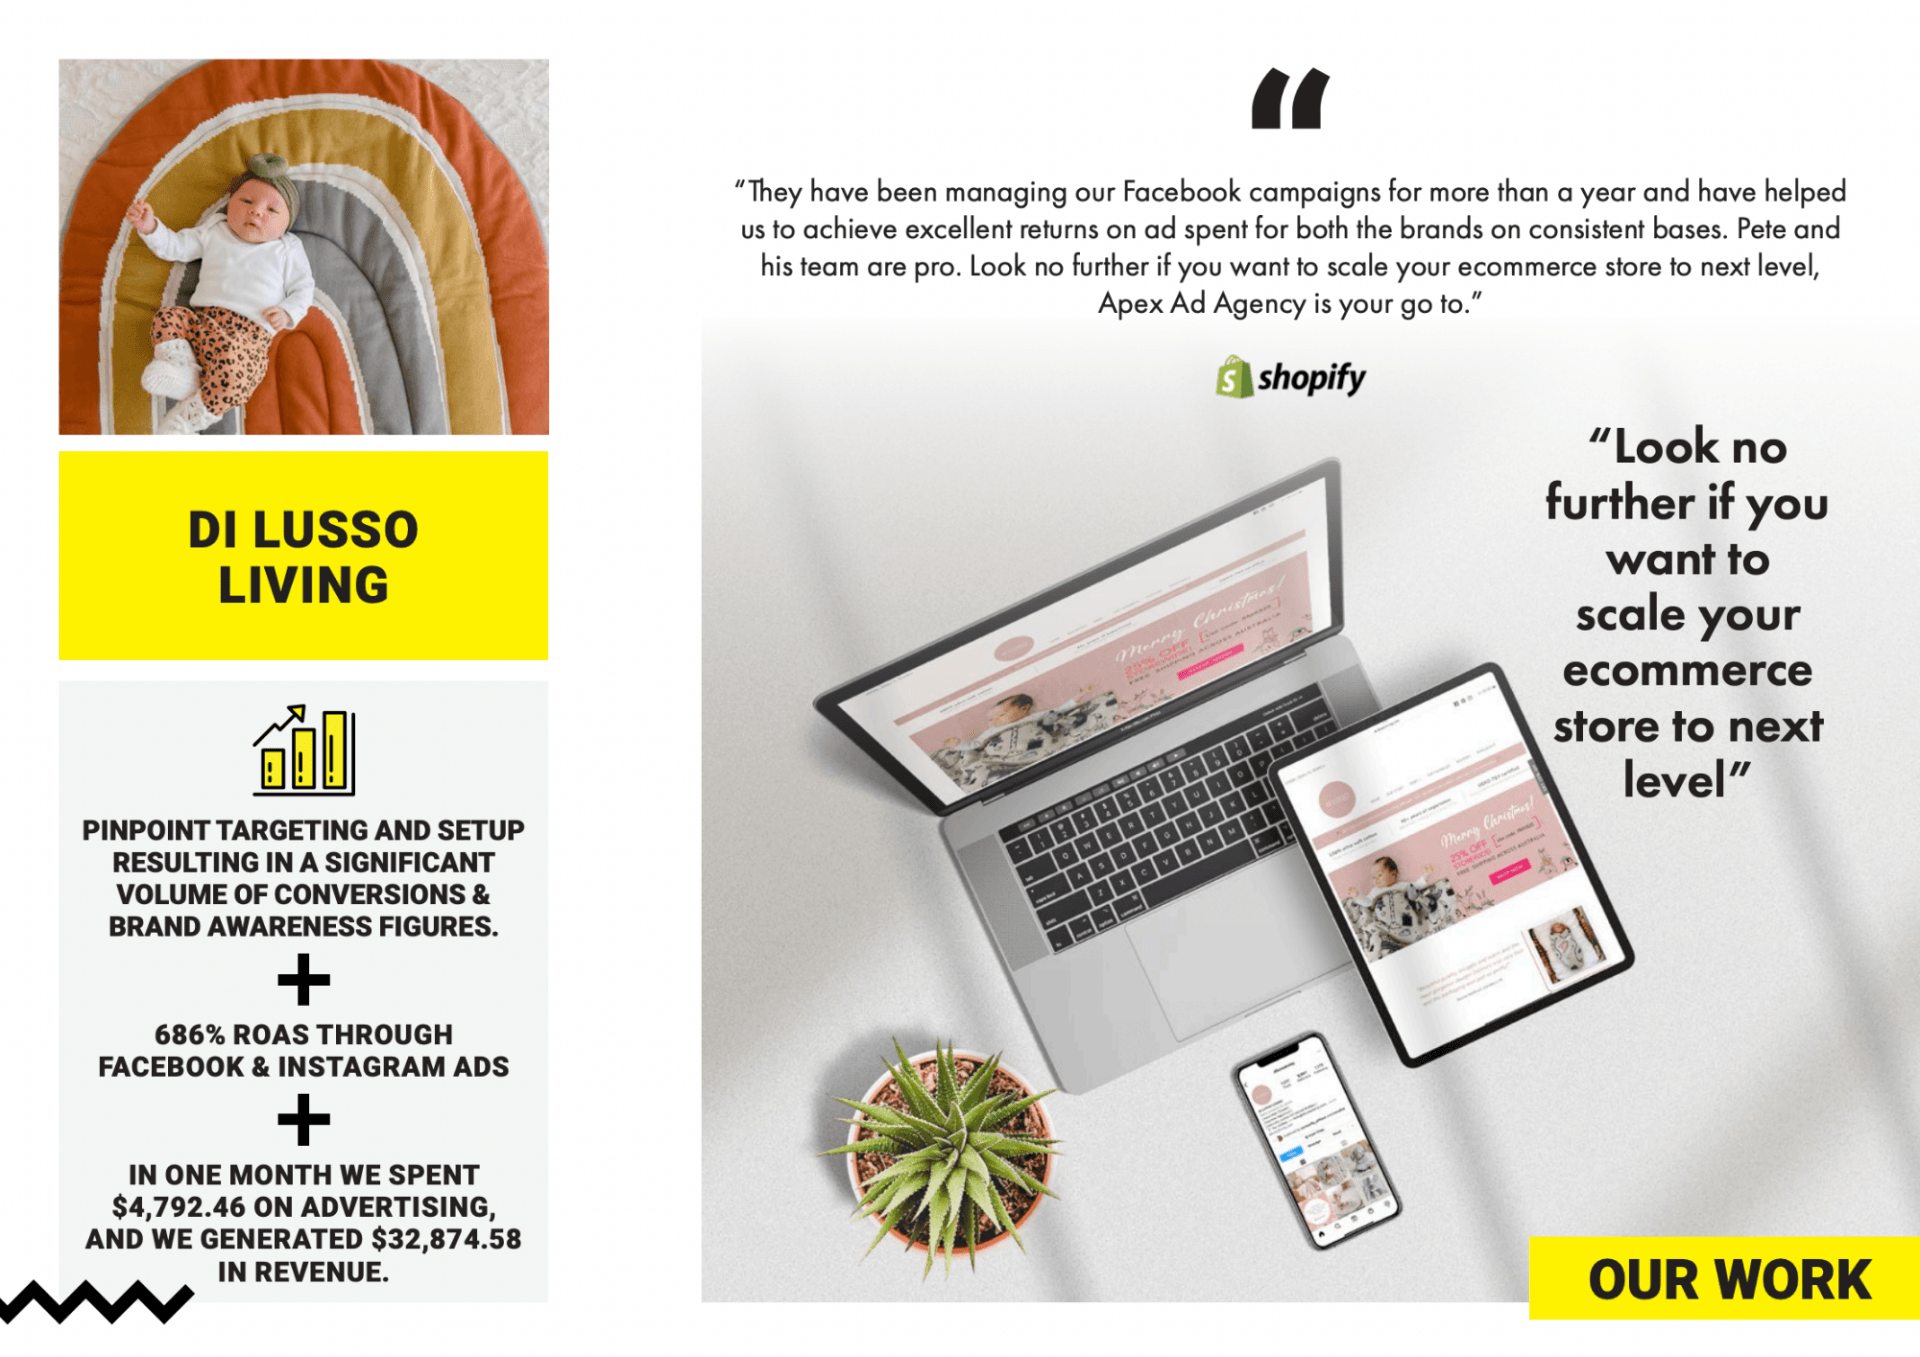 Highlighting Apex Ad Agency's ROAS for Di Lusso Living - An Image Of Our Successful Marketing Campaign and Outstanding Results.